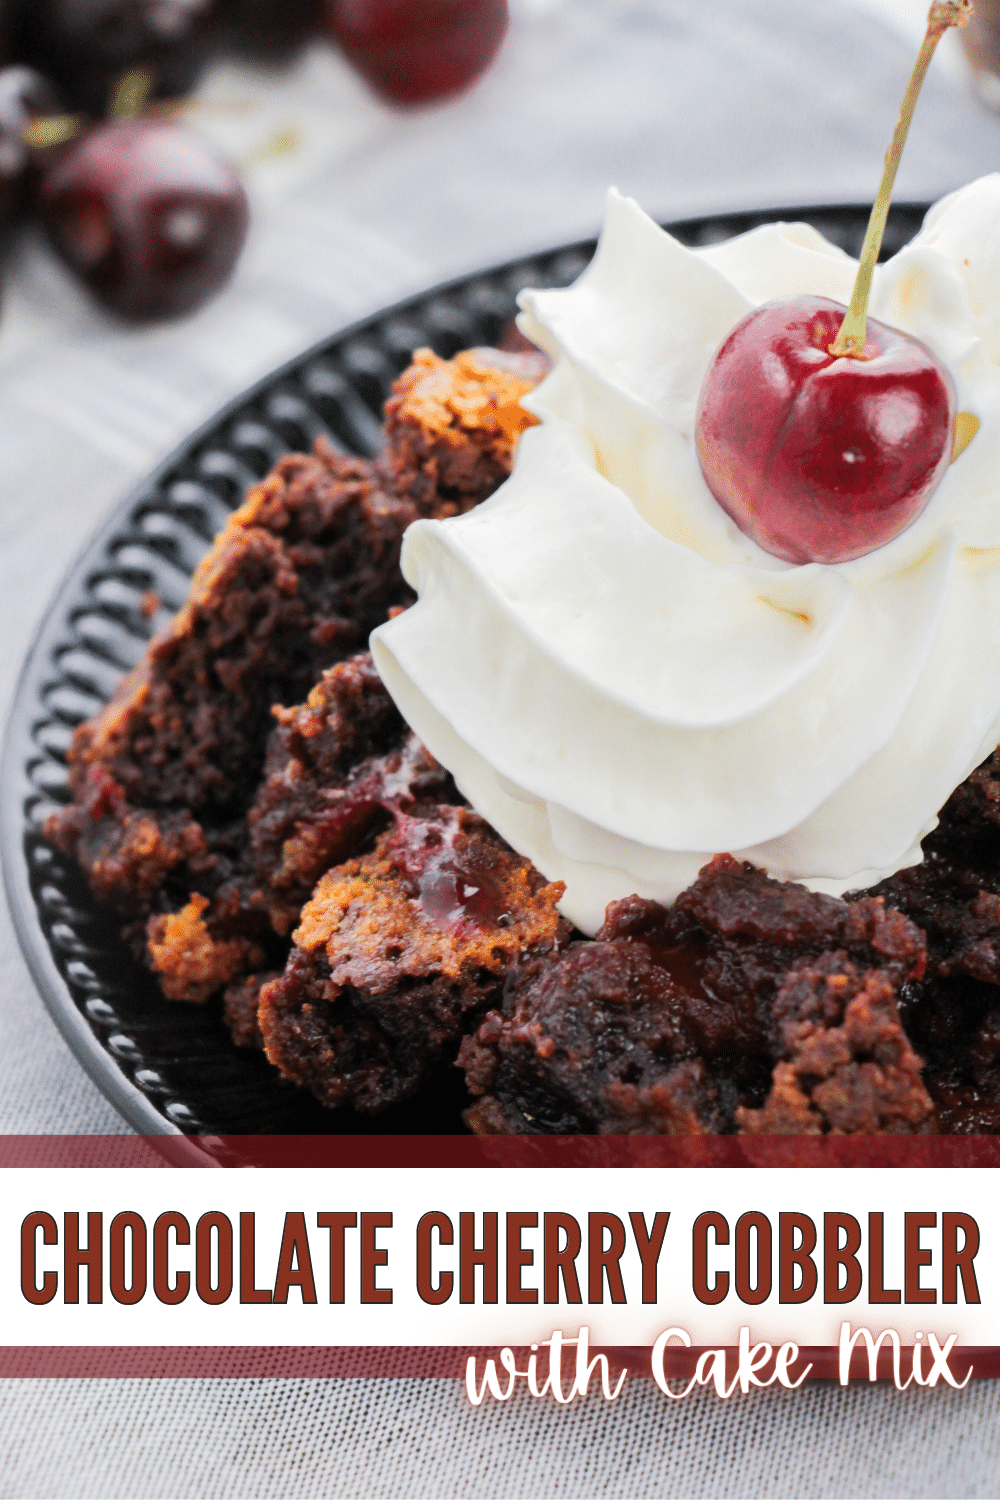 This Chocolate Cherry Cobbler is a dreamy, decadent dessert that appeals to everyone’s sweet tooth. It's also a dump and go easy recipe. #chocolatecherrycobbler #cherrycobbler #dumpandgorecipe #dessert via @wondermomwannab